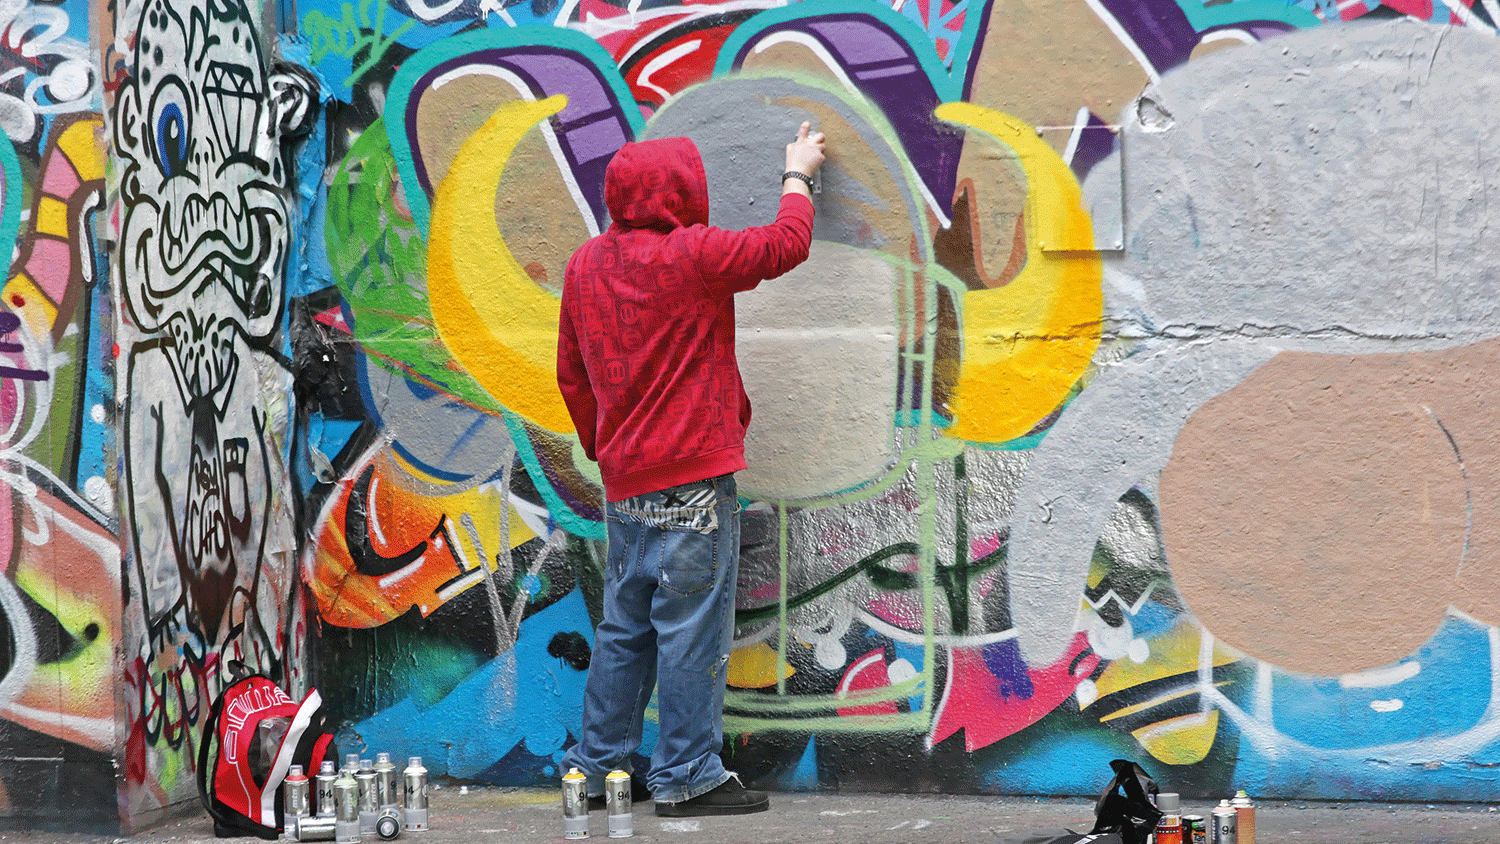 a guy wearing red hood painting a wall